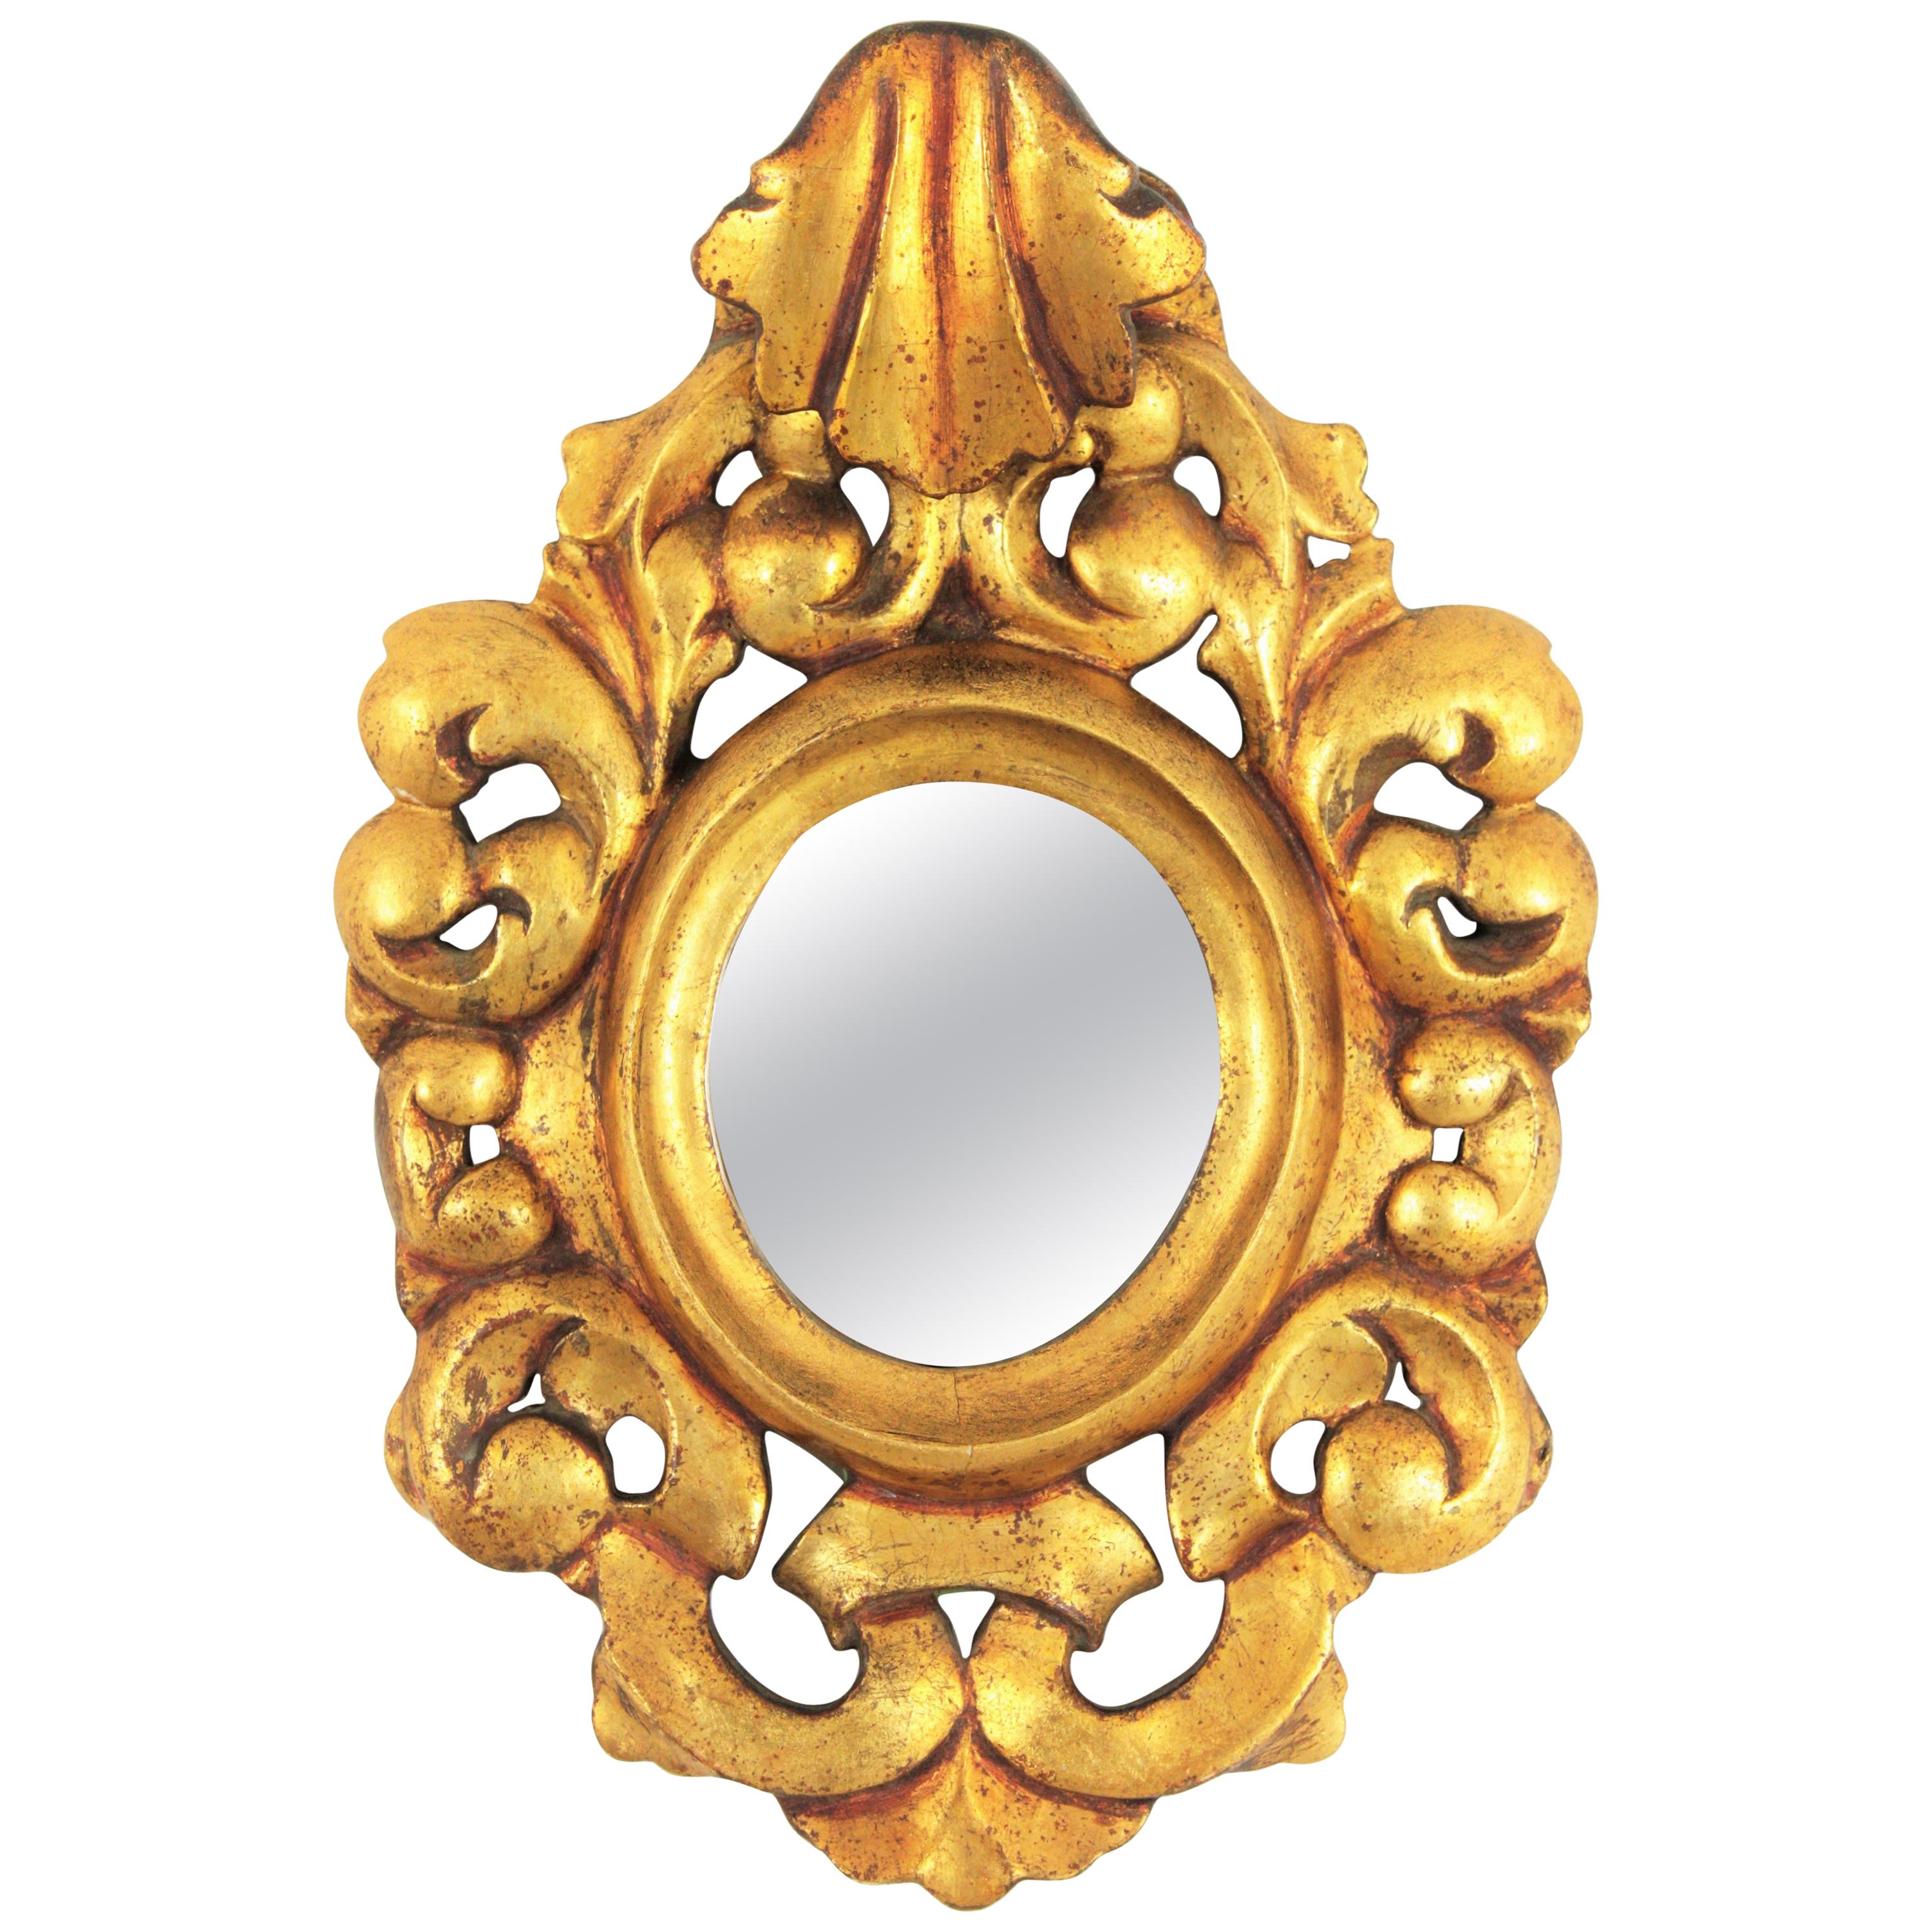 Rococo style mirror miniature with a carved giltwood frame and crest, Spain, 1940s.
A carved gold gilded frame surrounding an oval shaped glass and a beautiful crest adorning the top.
This mirror is a rare find due to its size.
It has been